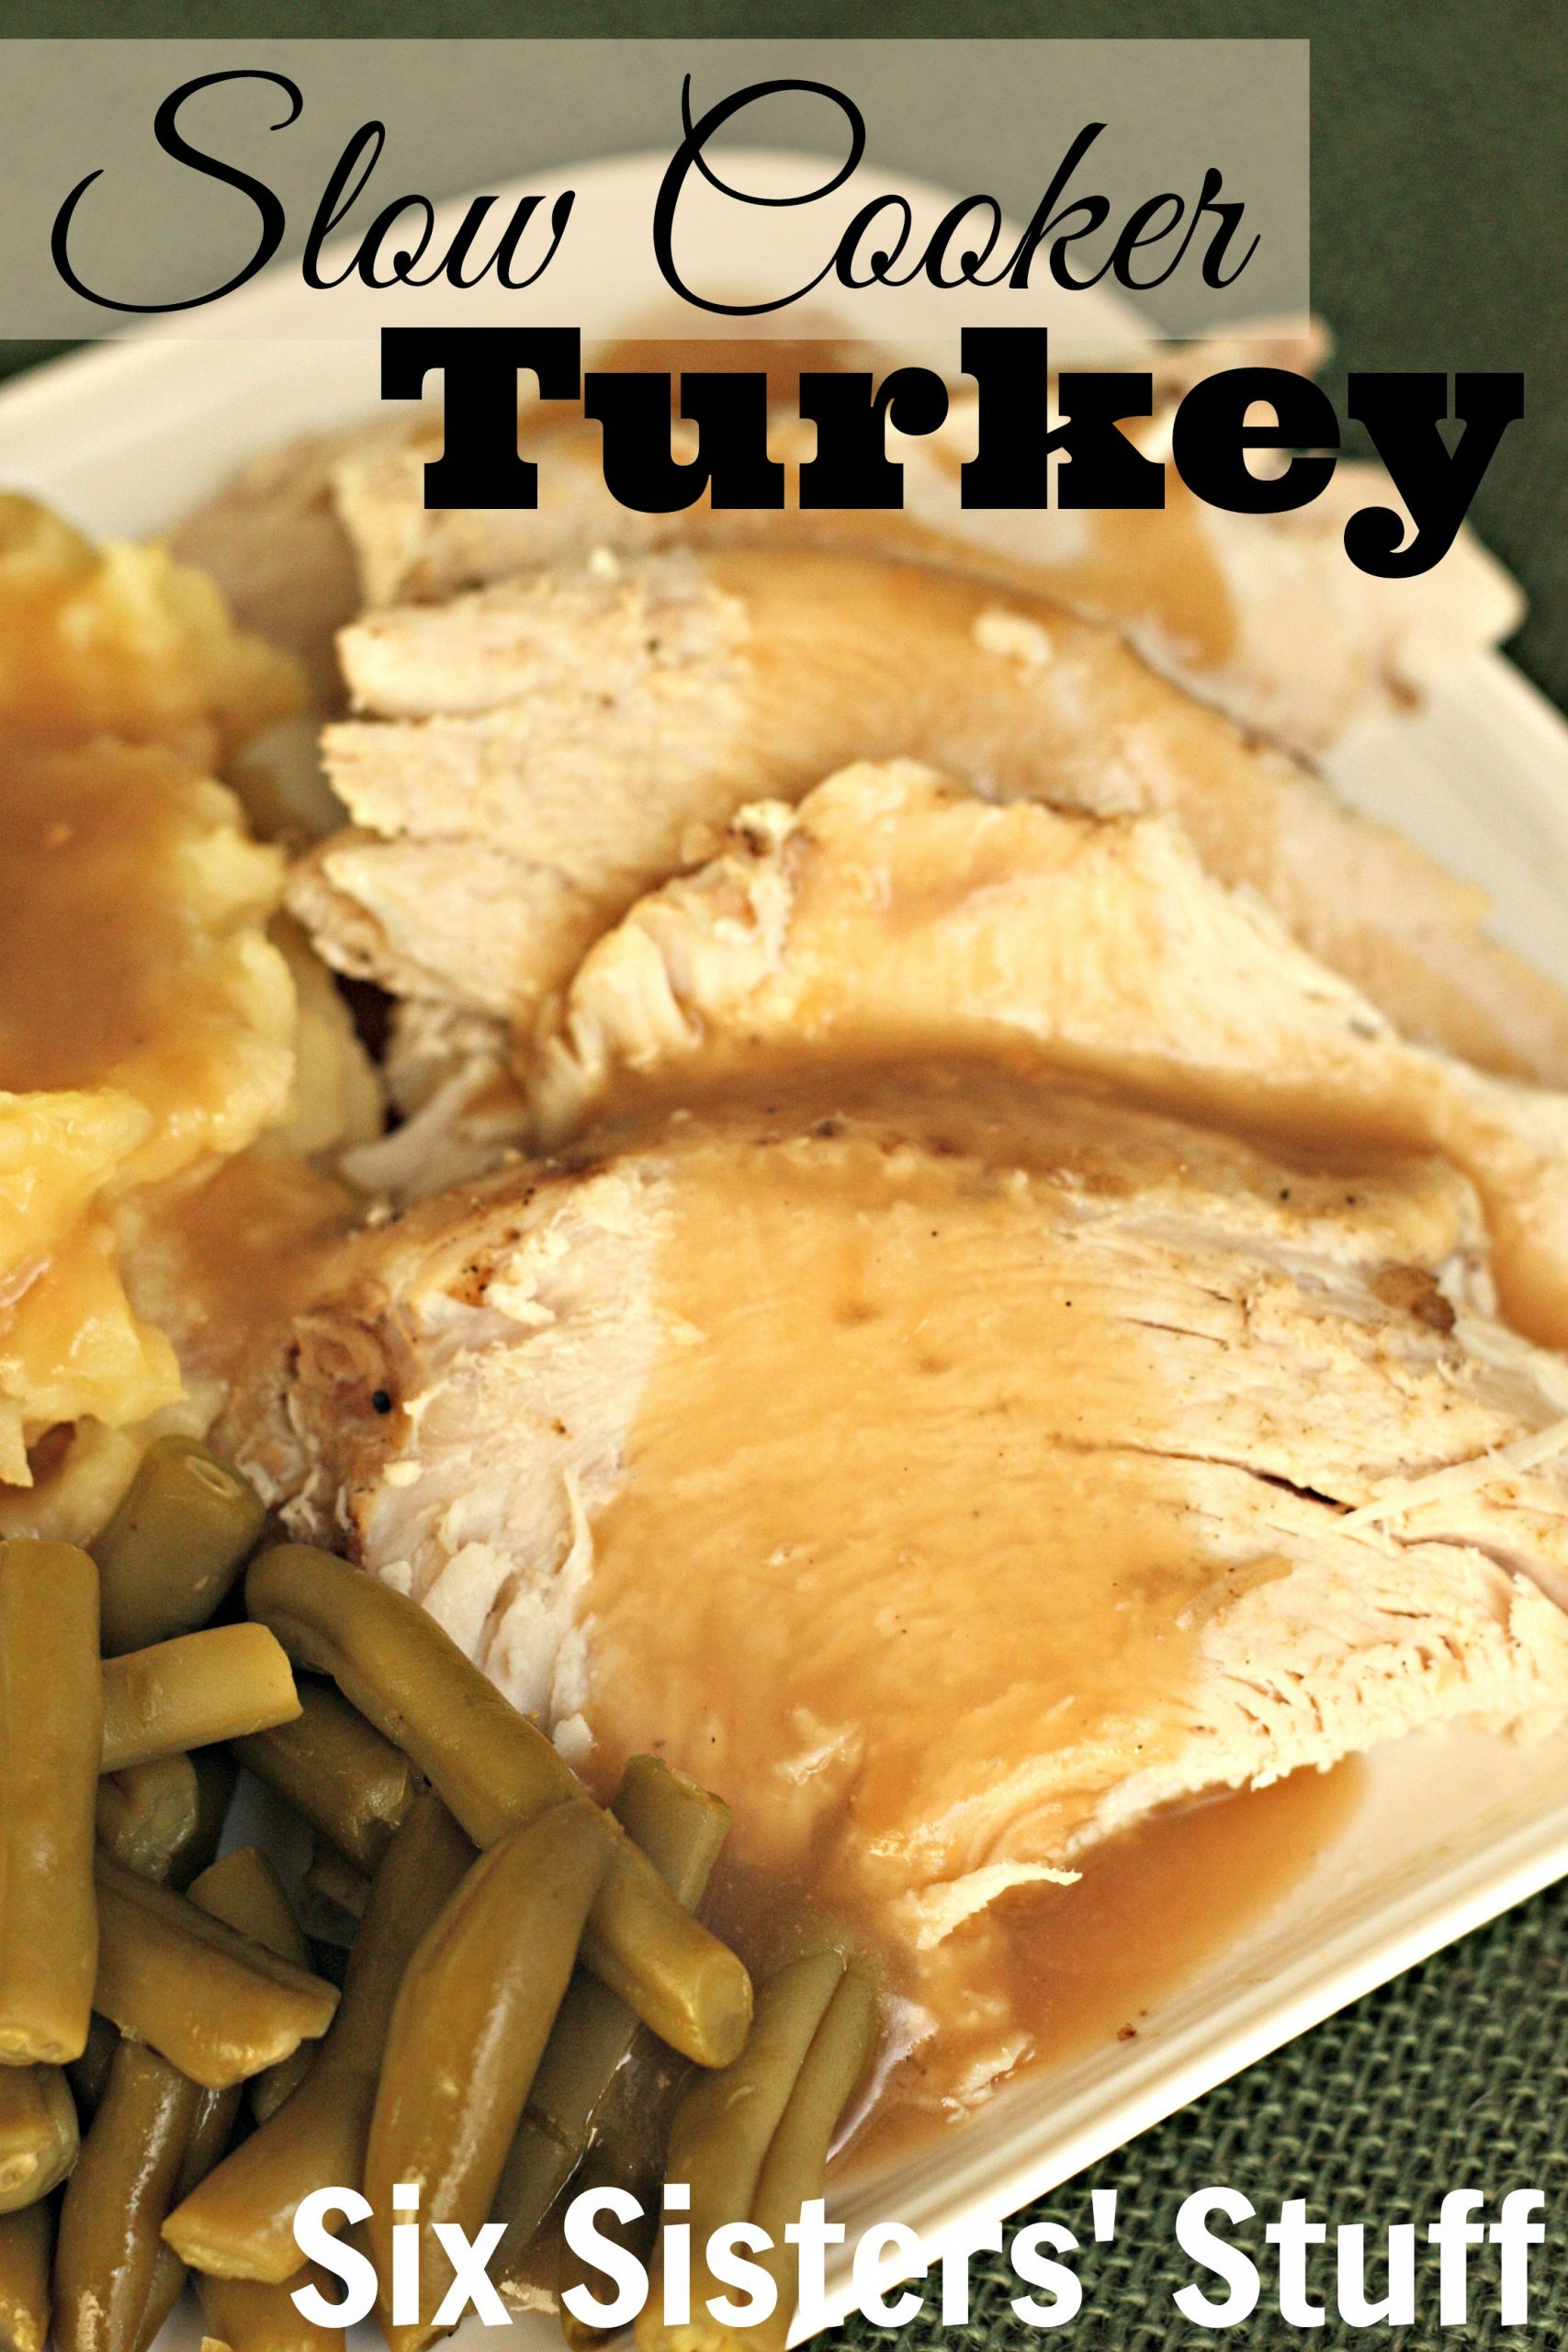 Slow Cooker Thanksgiving Turkey
 10 Awesome Thanksgiving Turkey Recipes LDS S M I L E